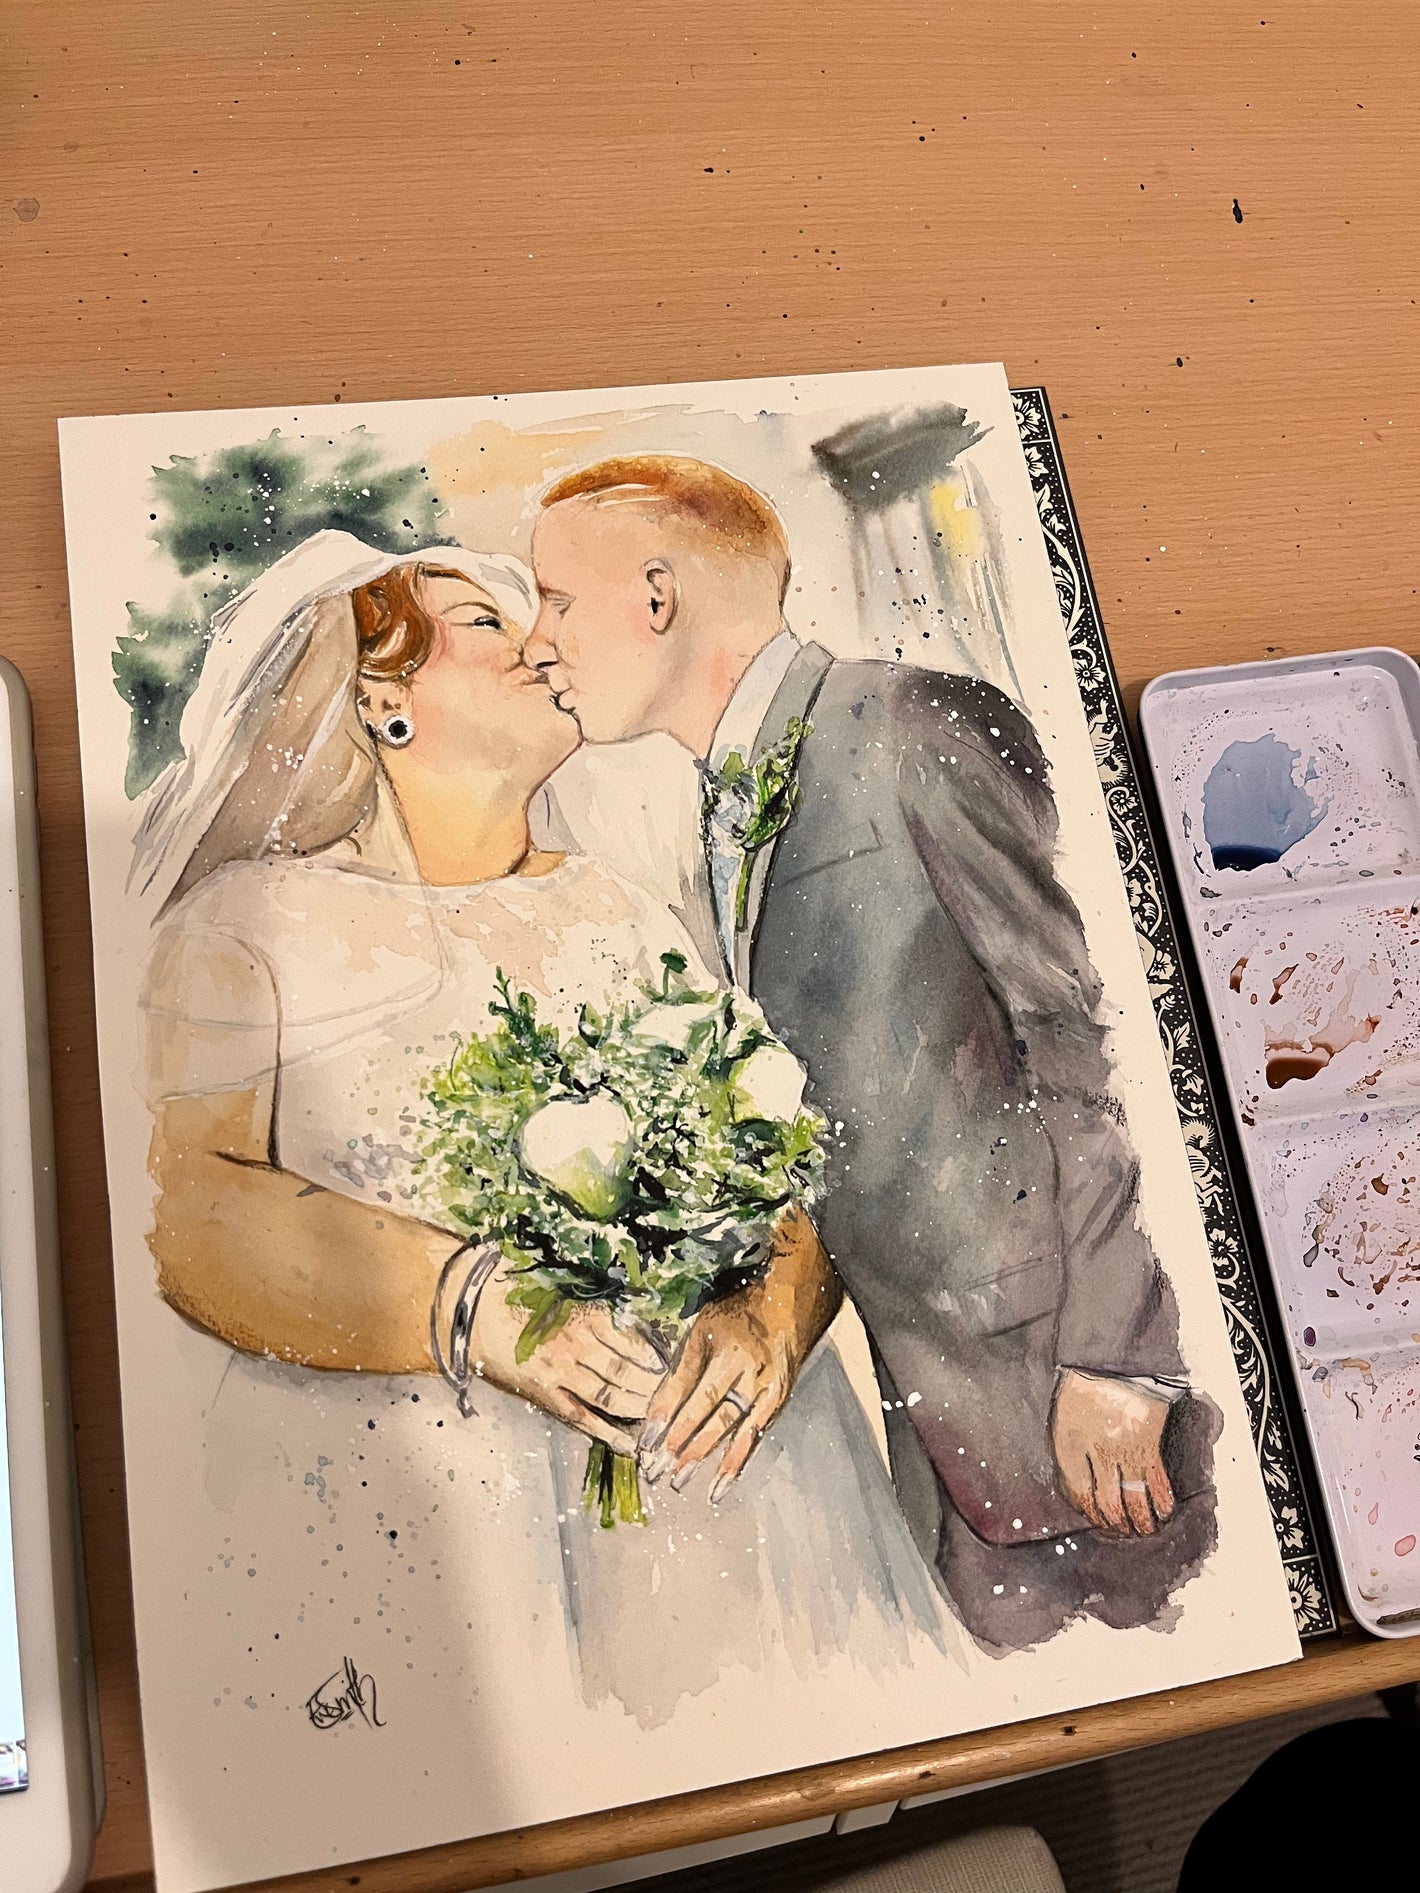 Original watercolour portrait of a bridge and groom on their wedding day, captured by Grimsby artist Eve Leoni Smith.